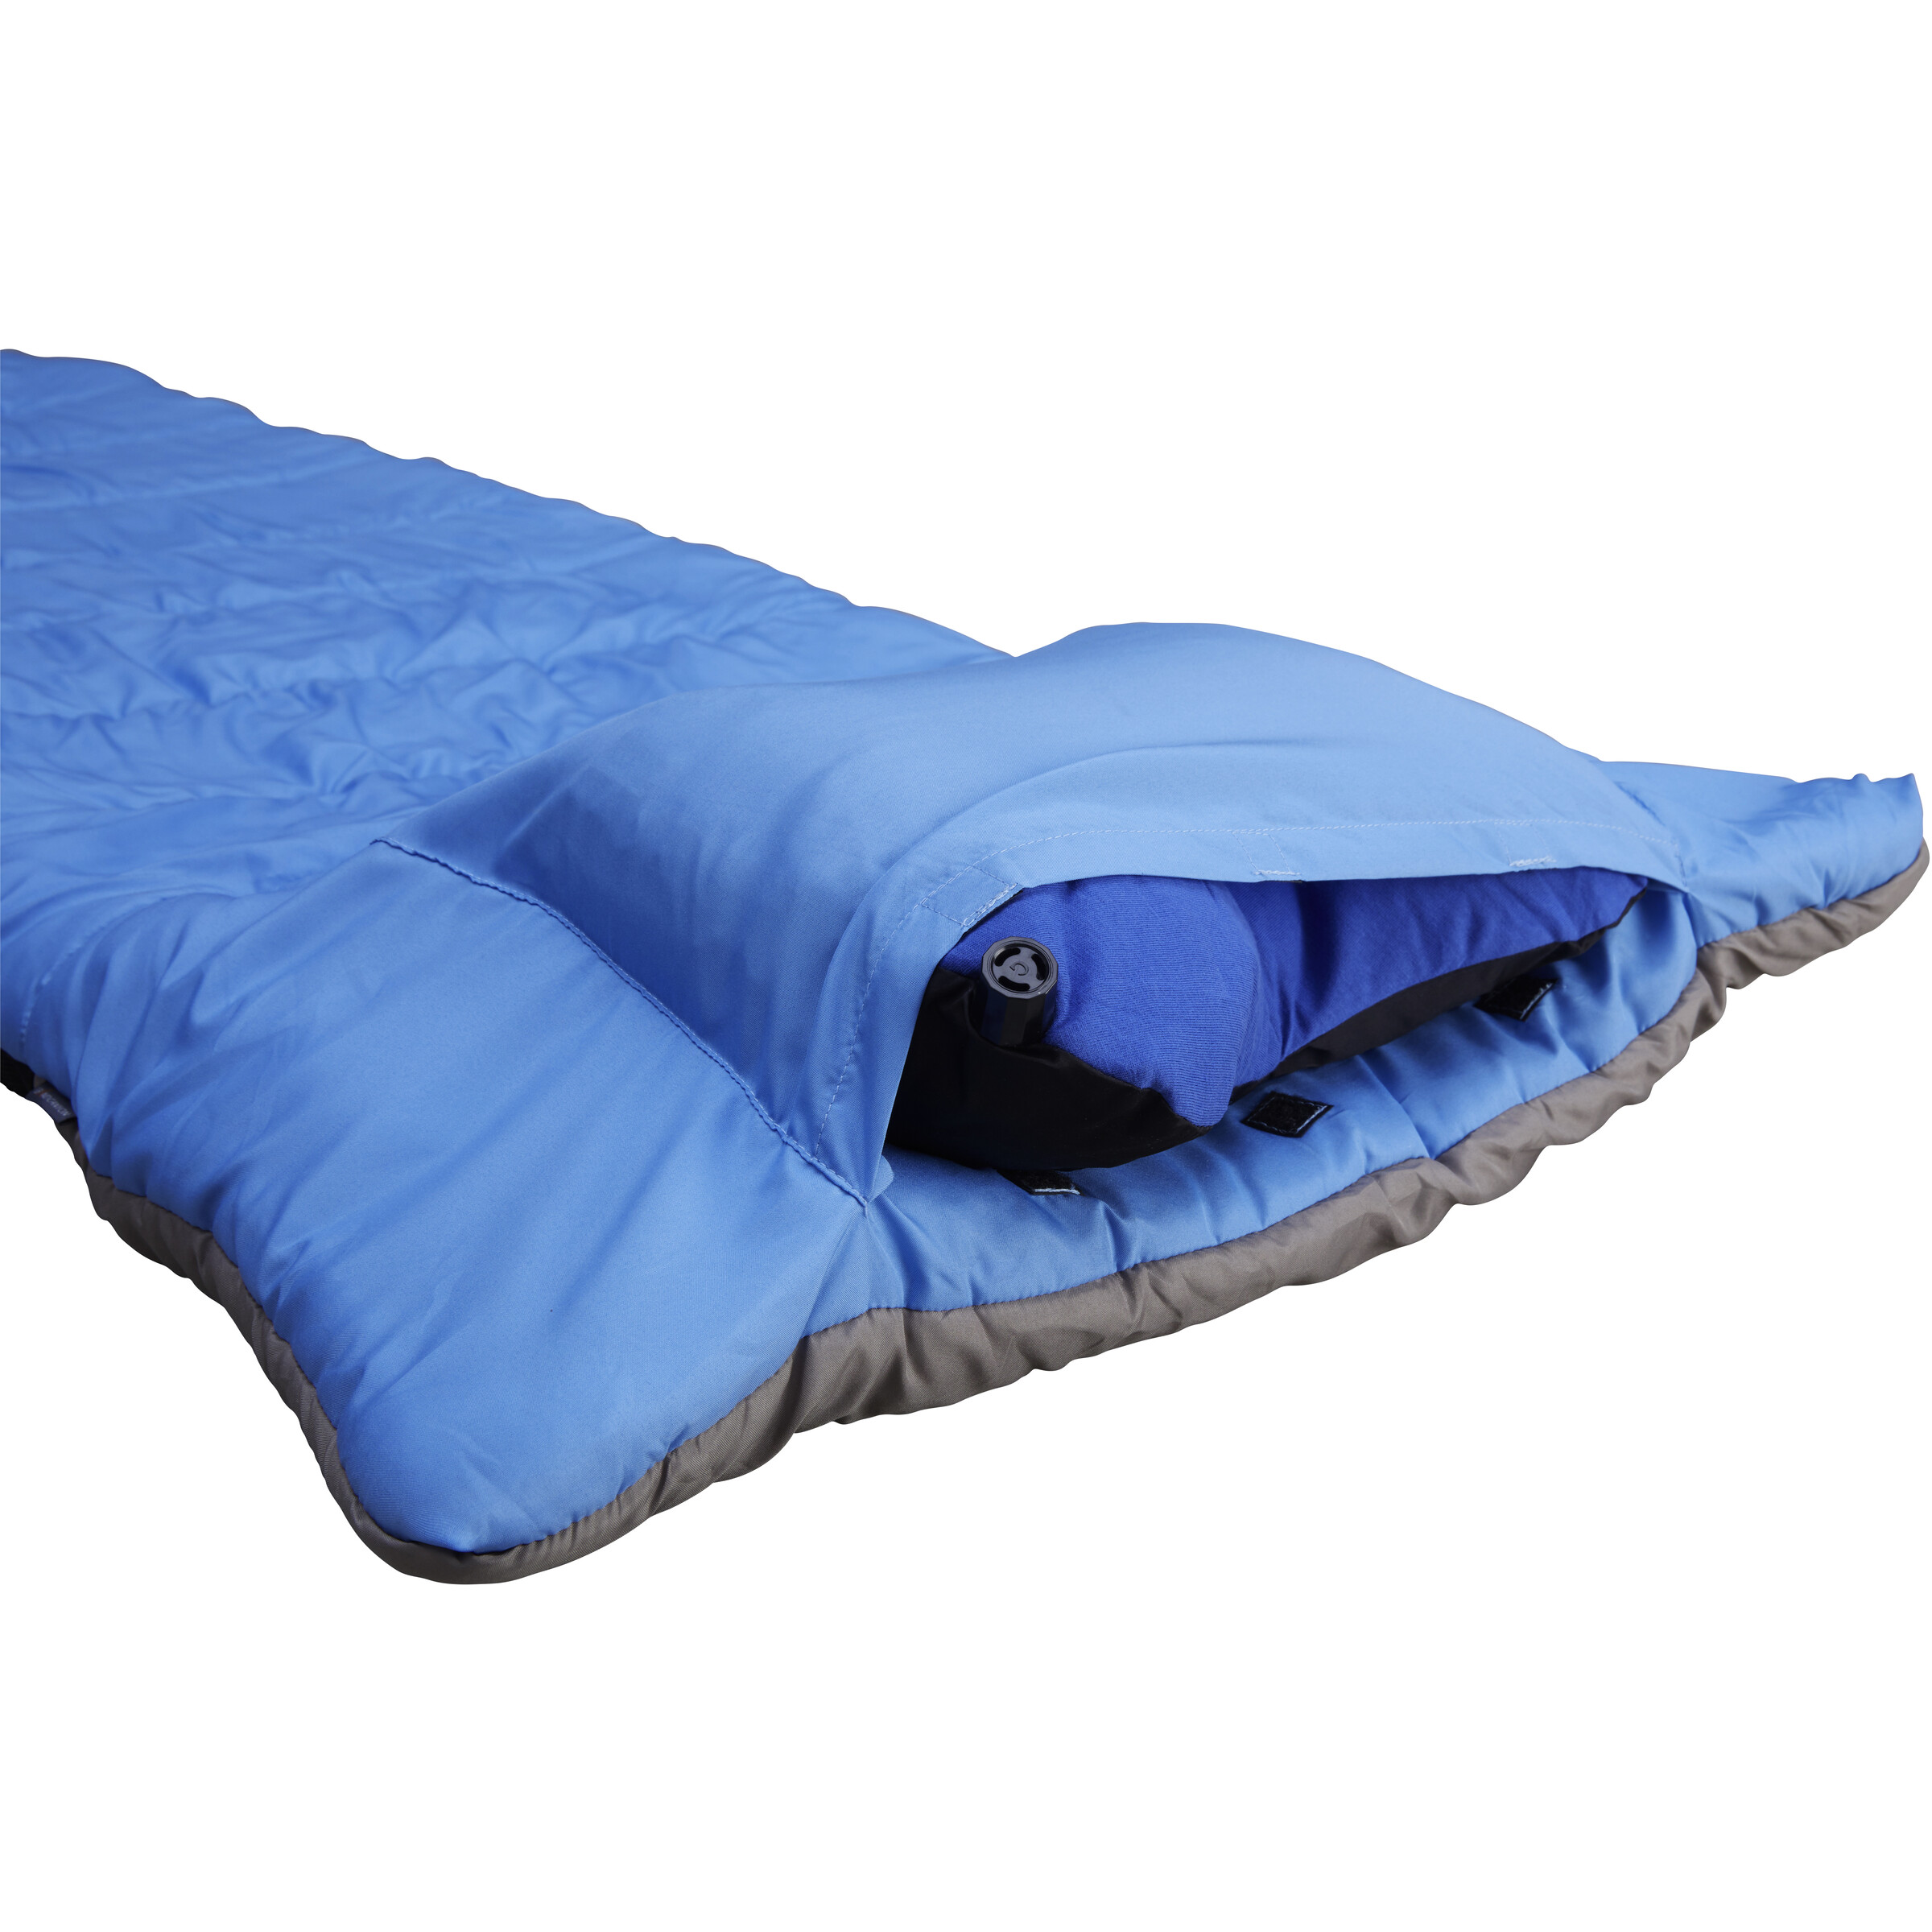 grand-canyon-topaz-camping-bed-cover-m-dark-blue-4.jpg